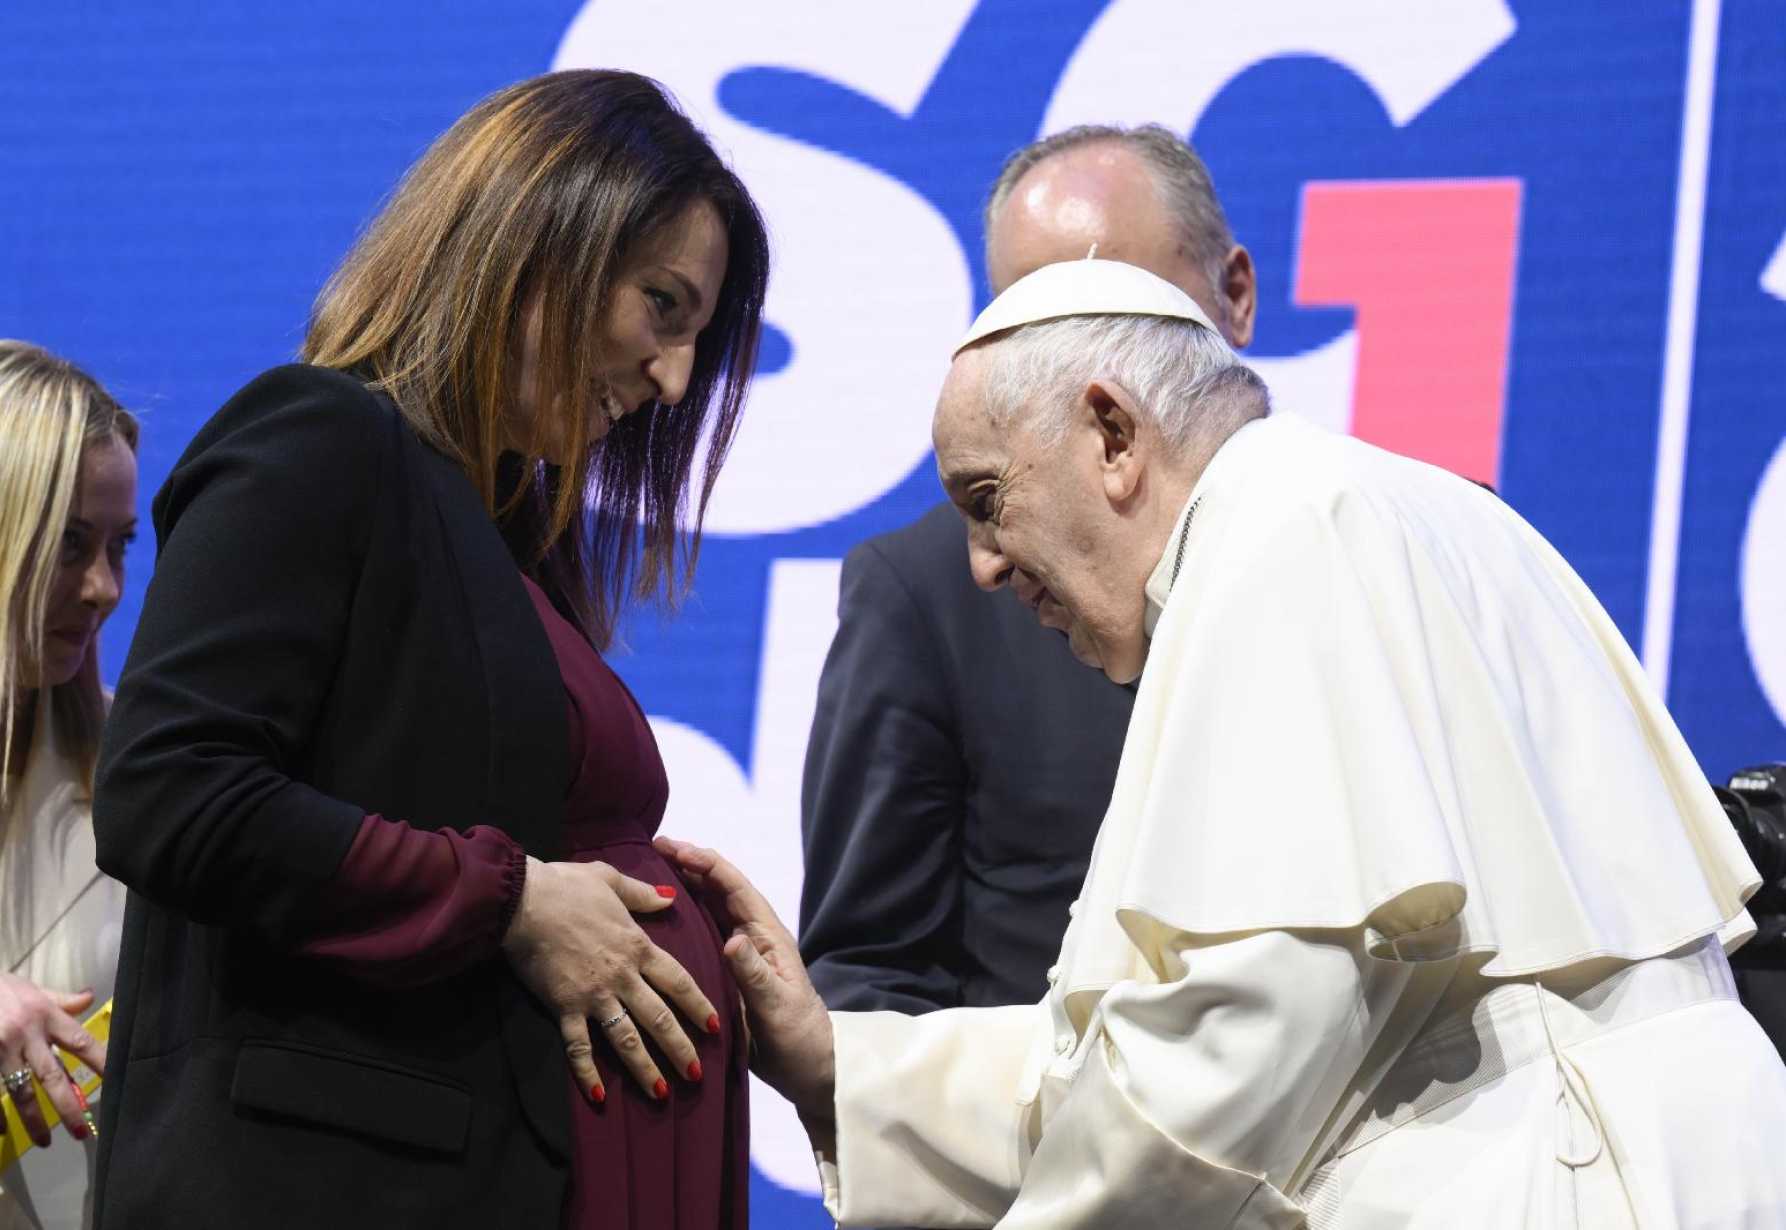 It's unfair, humiliating if only the rich can build a family, pope says